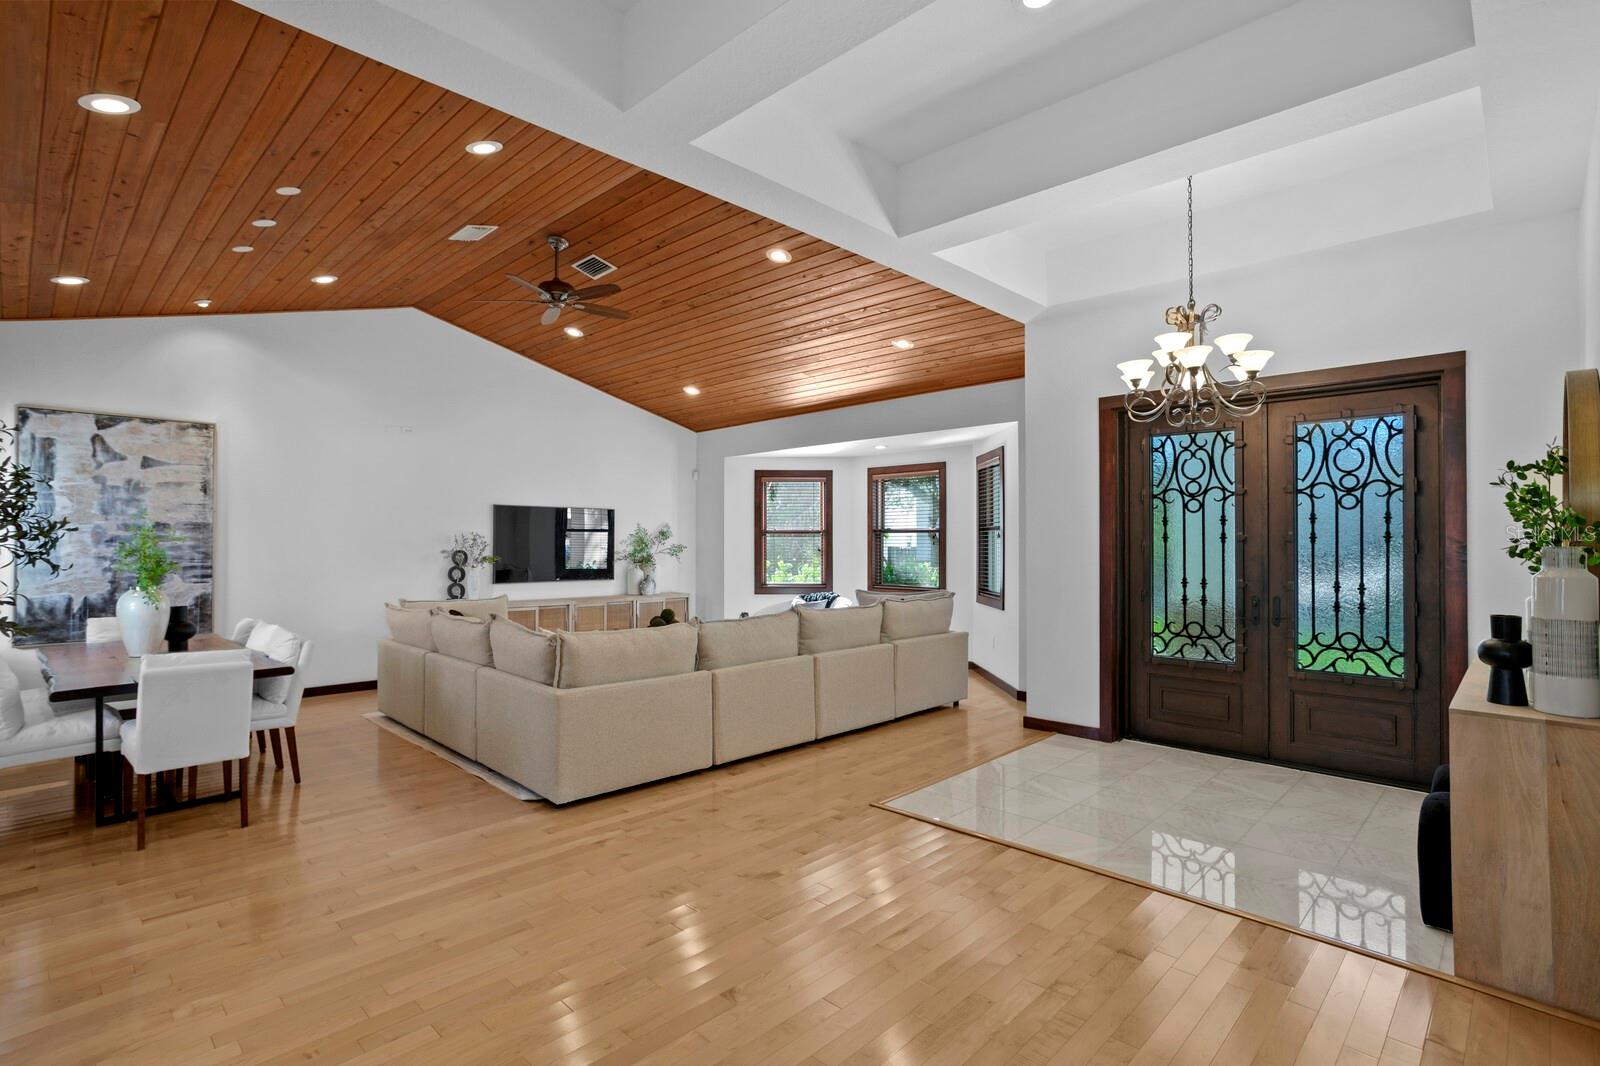 The spacious foyer opens to the living and dining rooms